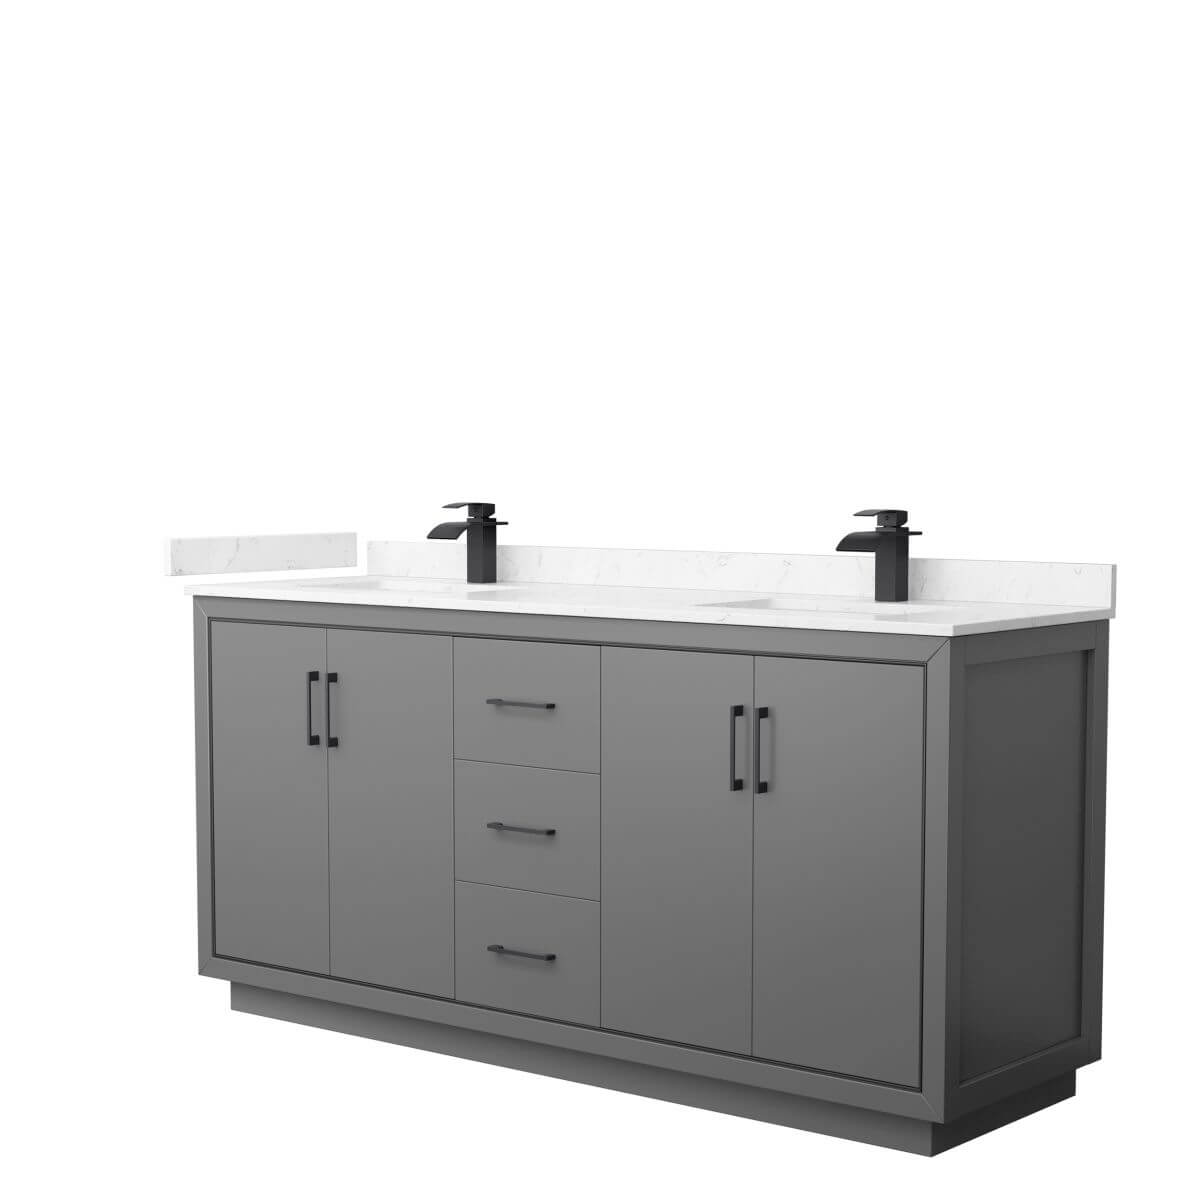 Wyndham Collection WCF111172DGBC2UNSMXX Icon 72 inch Double Bathroom Vanity in Dark Gray with Carrara Cultured Marble Countertop, Undermount Square Sinks and Matte Black Trim